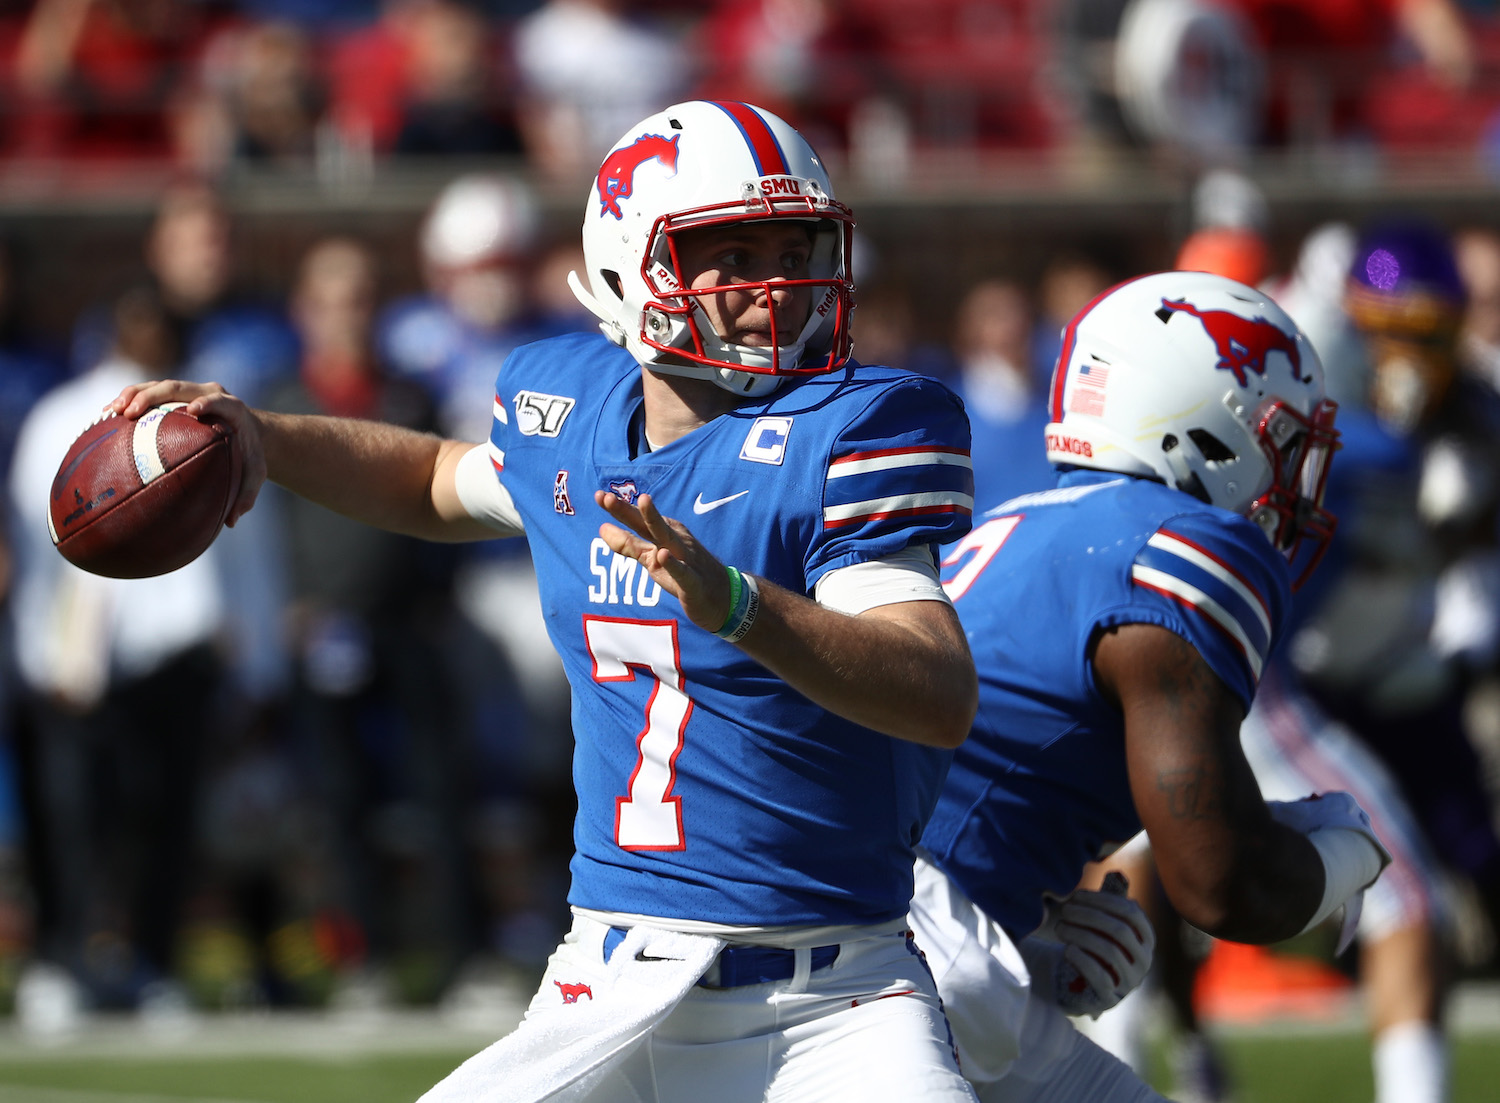 SMU QB Shane Buechele anxious to learn from Chiefs' Patrick